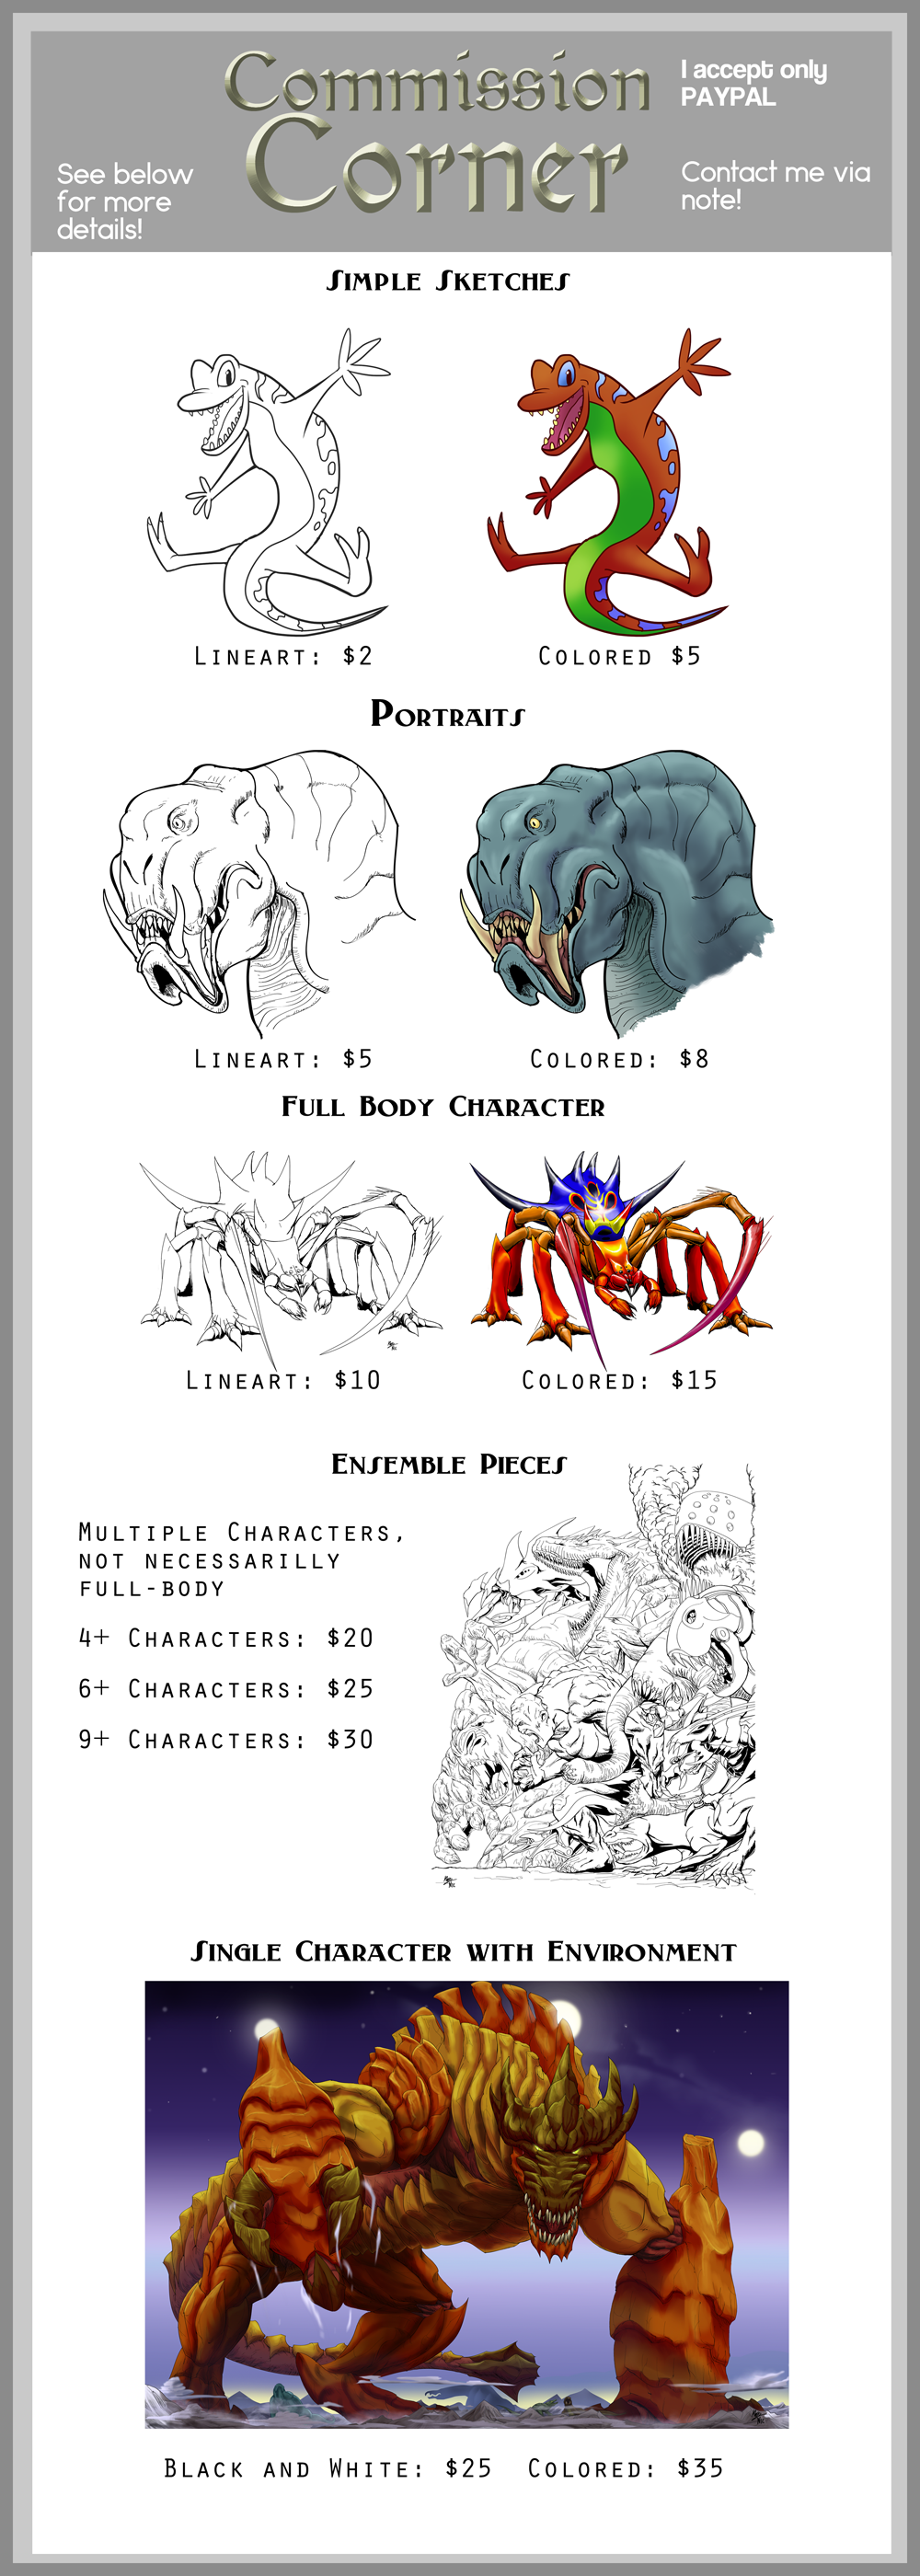 Oh hey! Commissions Rates!